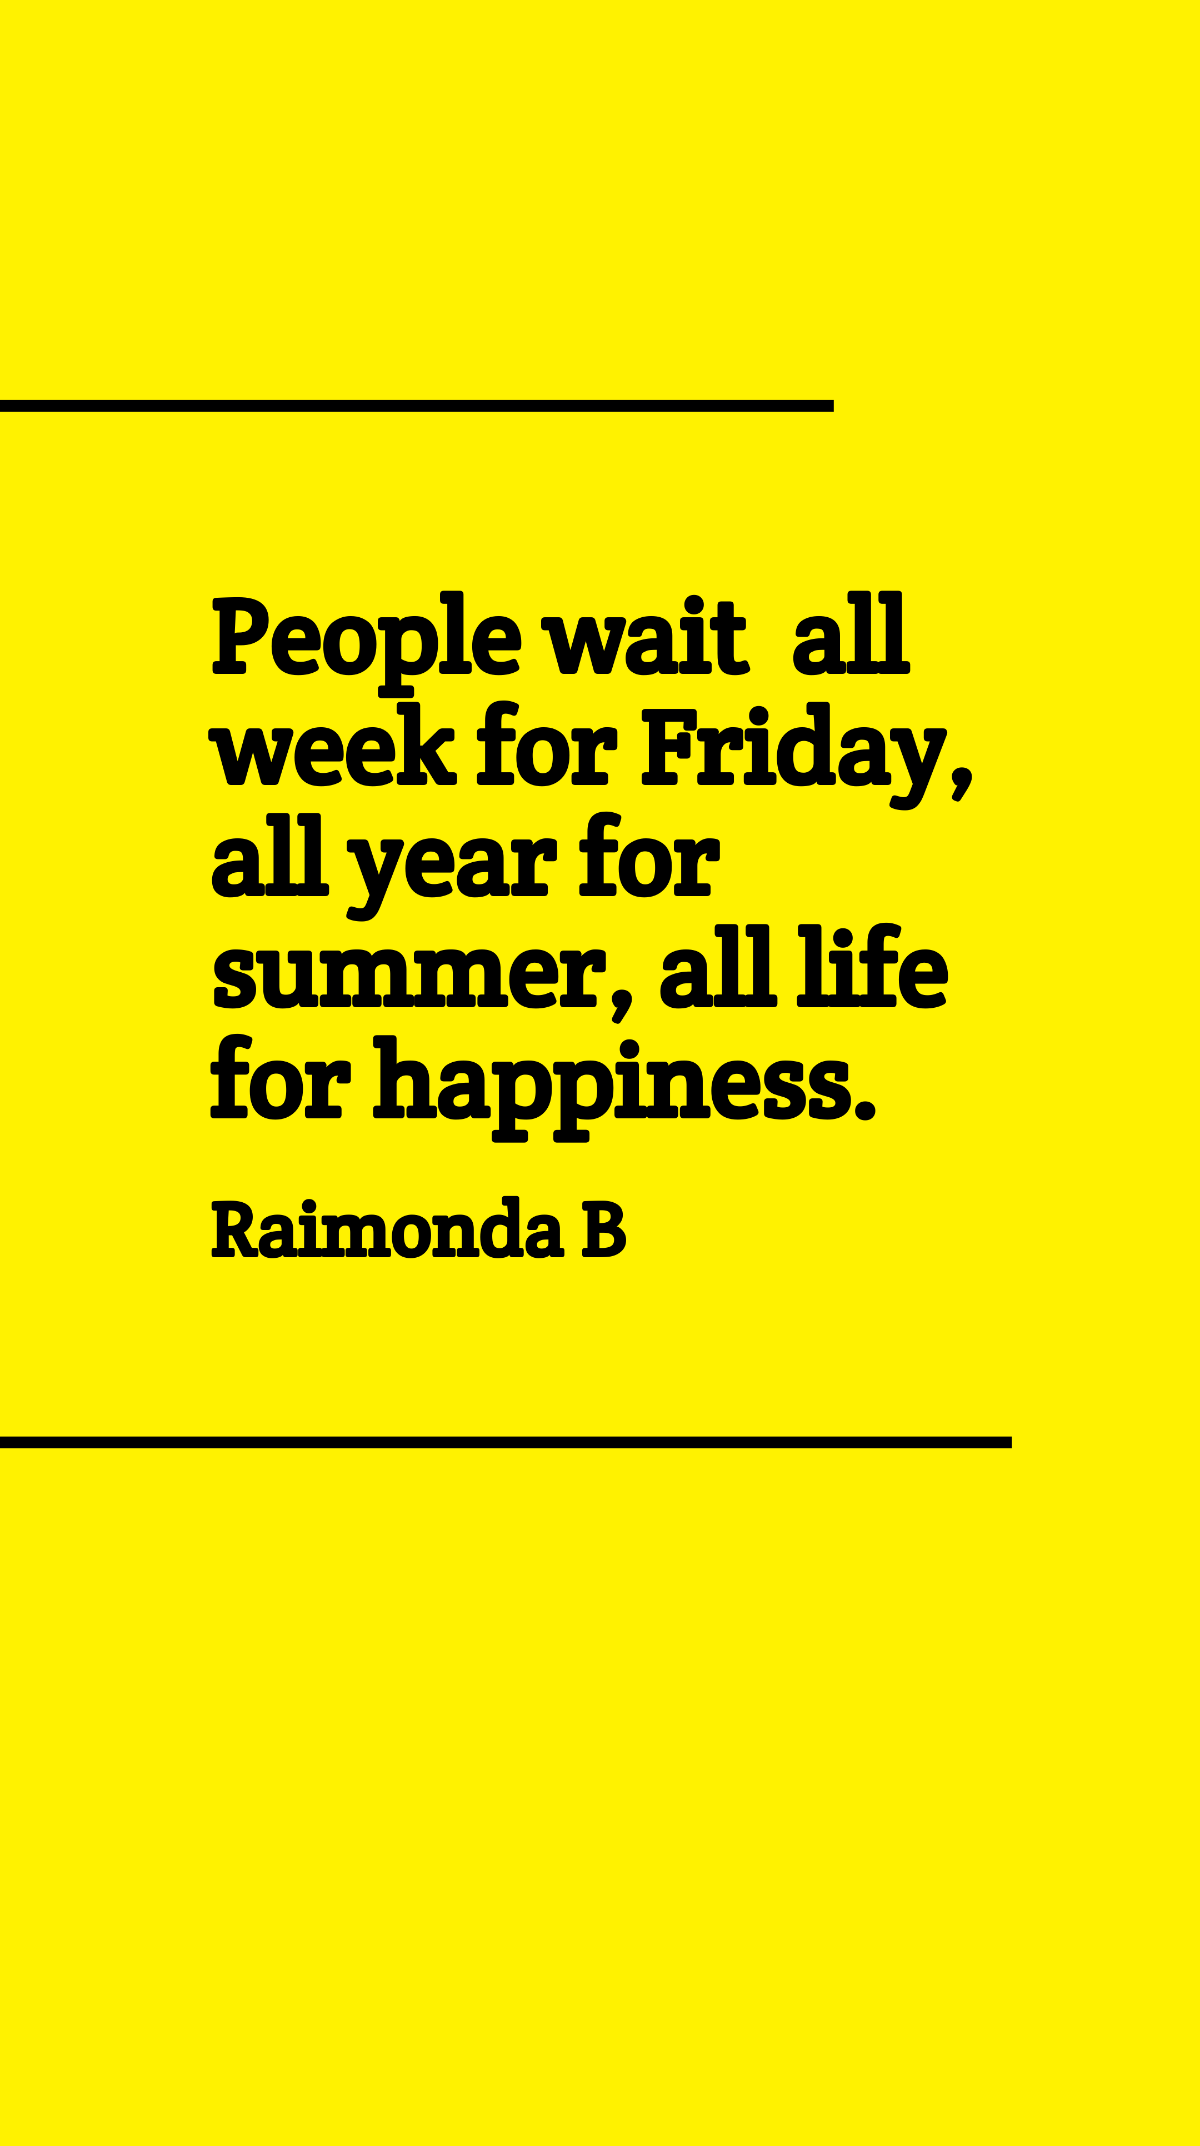 Raimonda B - People wait all week for Friday, all year for summer, all life for happiness.